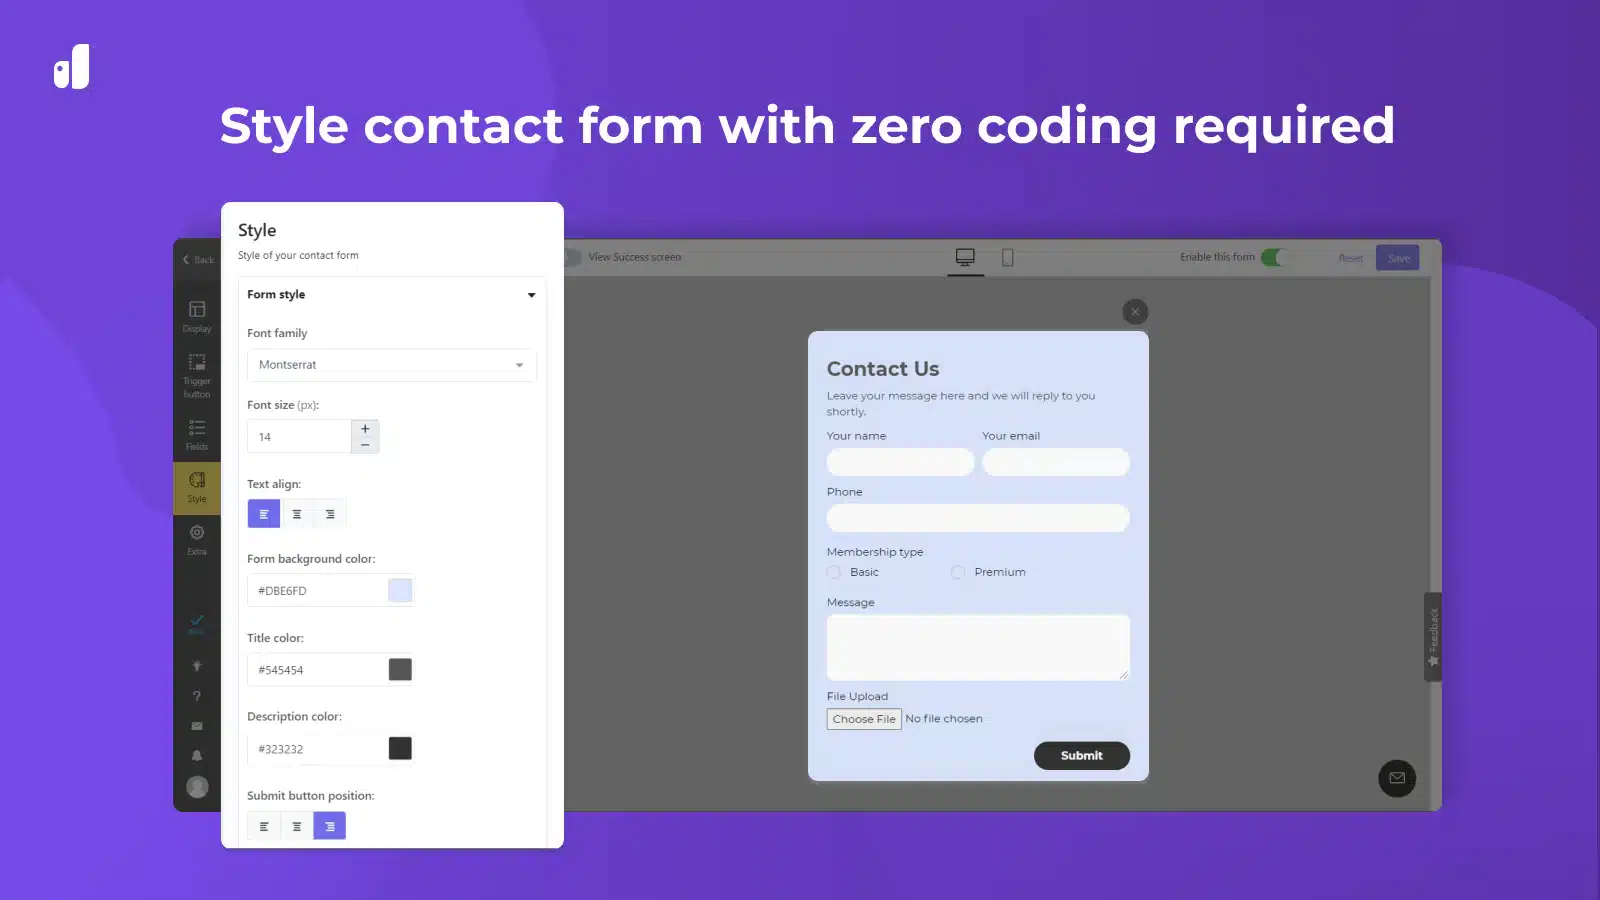 qikify-contact-form-builder-zero-coding-required